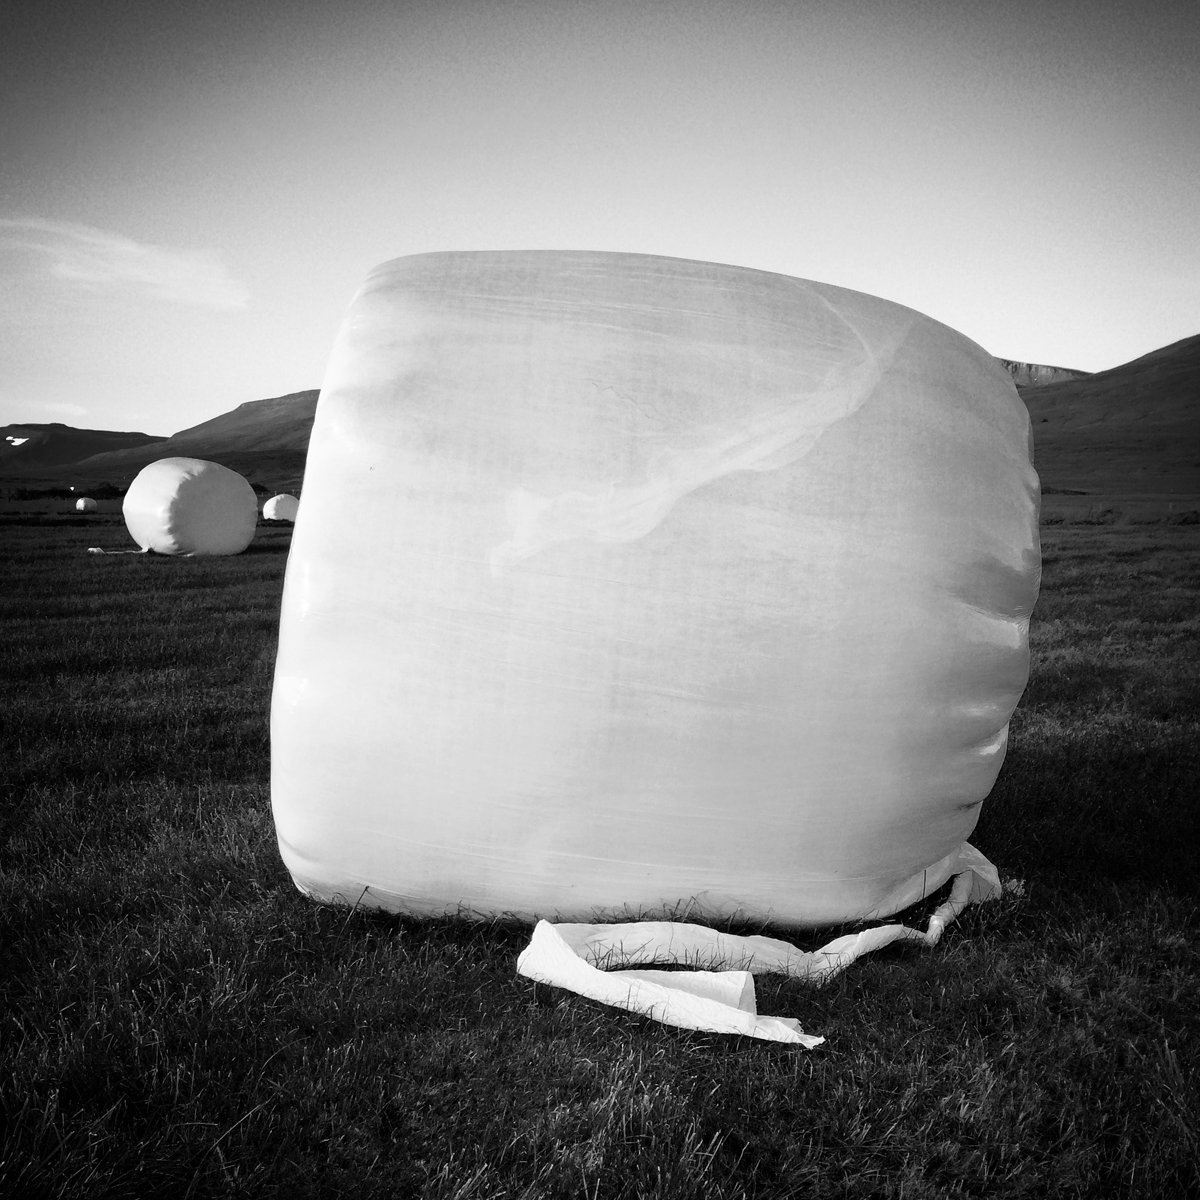 Shiny white plastic covers a series of round hay bales in a grassy landscape.